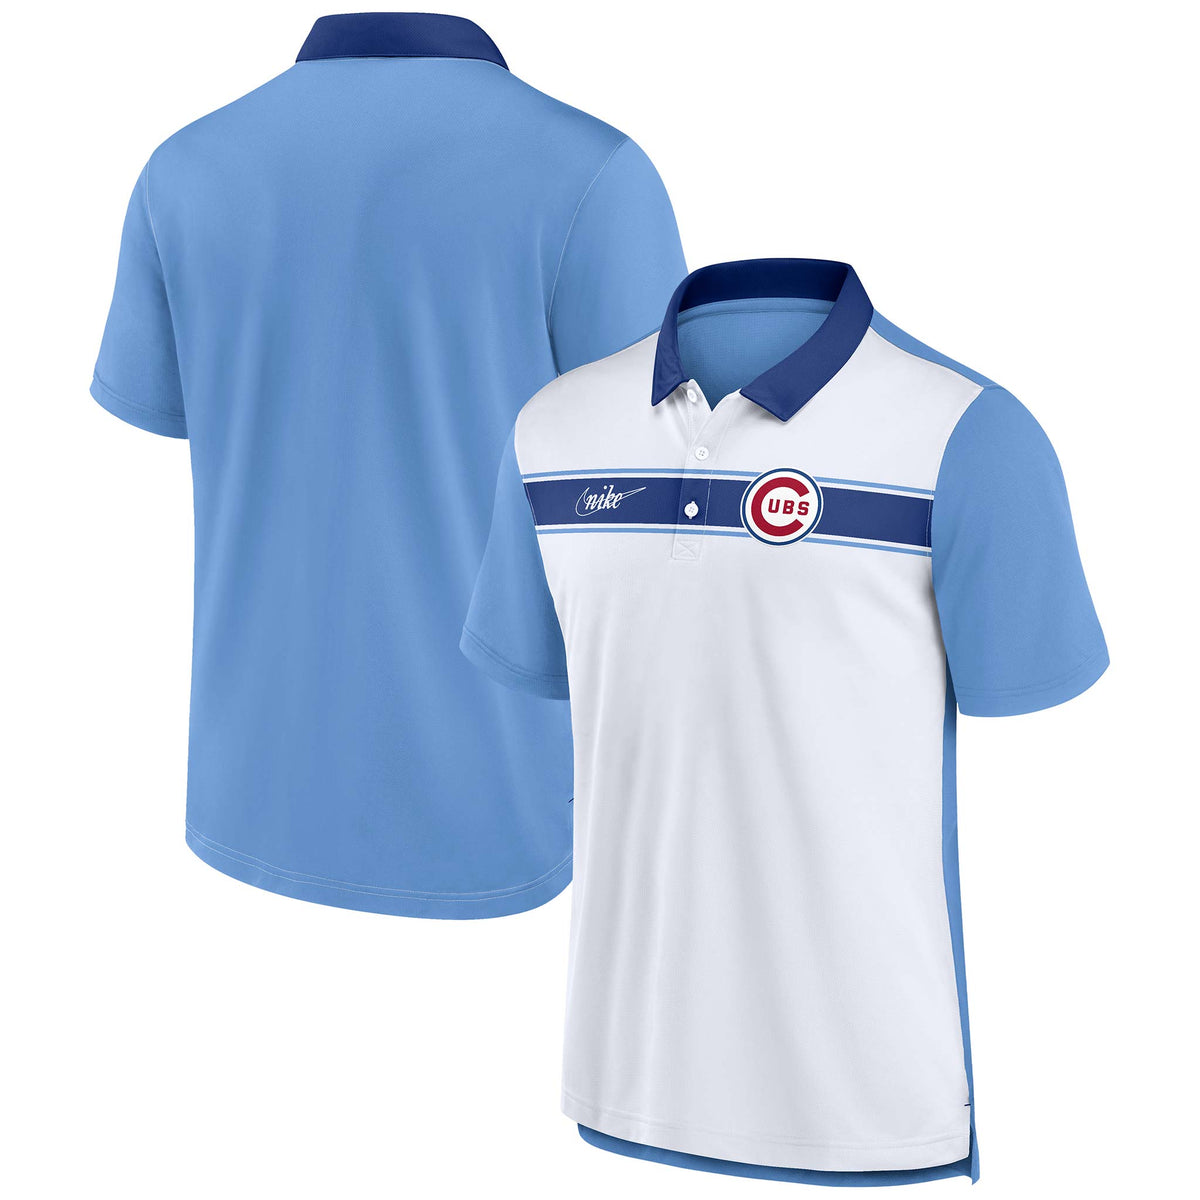 Chicago Cubs Nike Wrigleyville City Connect Sky Blue T-Shirt